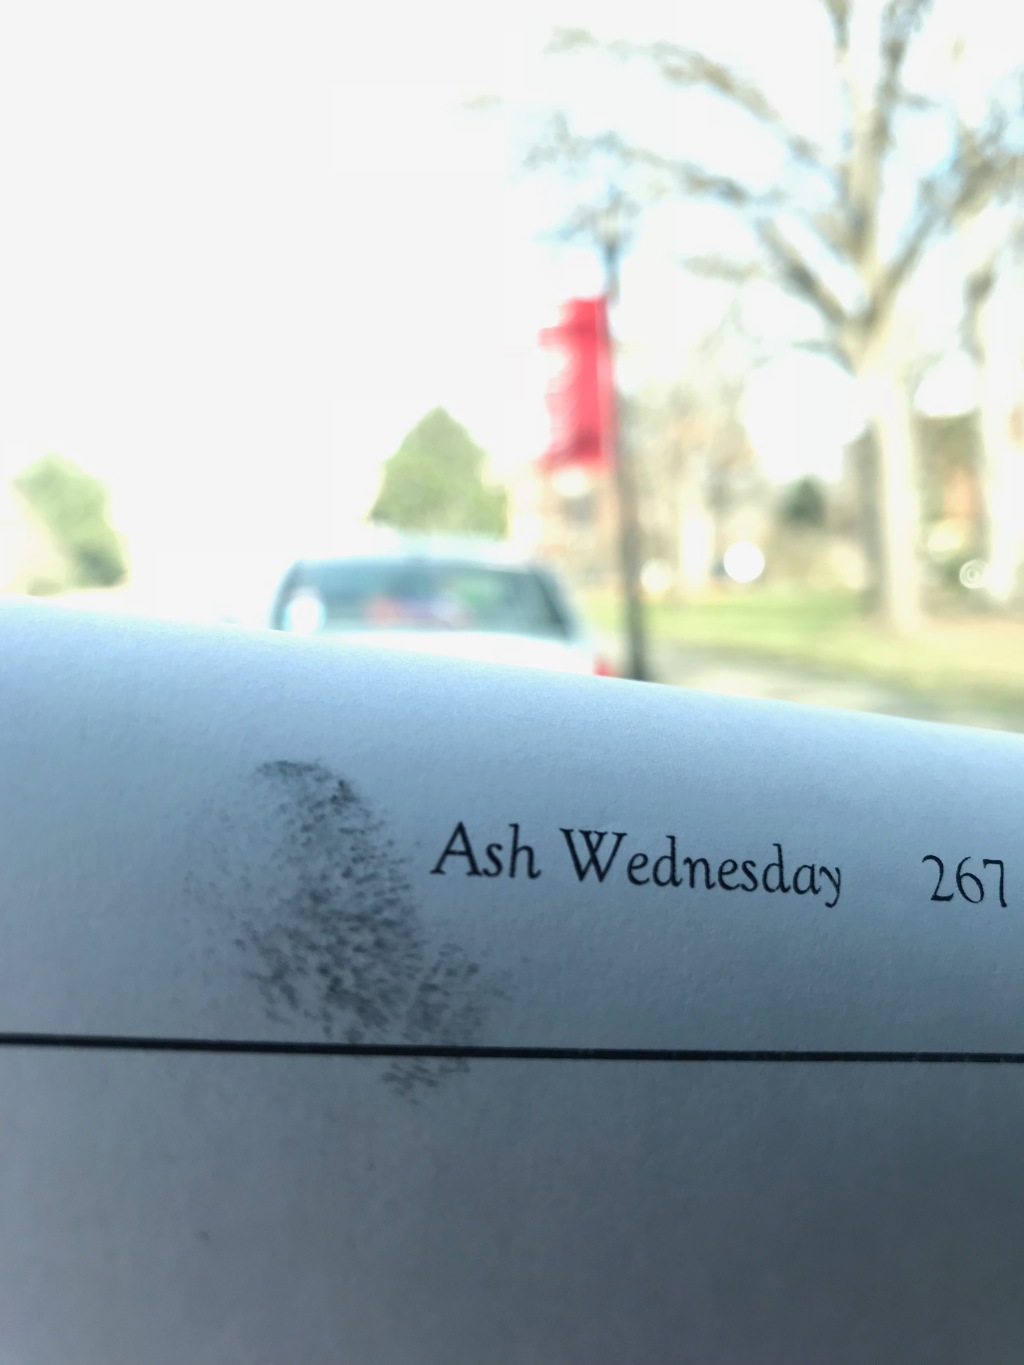 At the Intersection of Death and Love | Reflections on Ash Wednesday